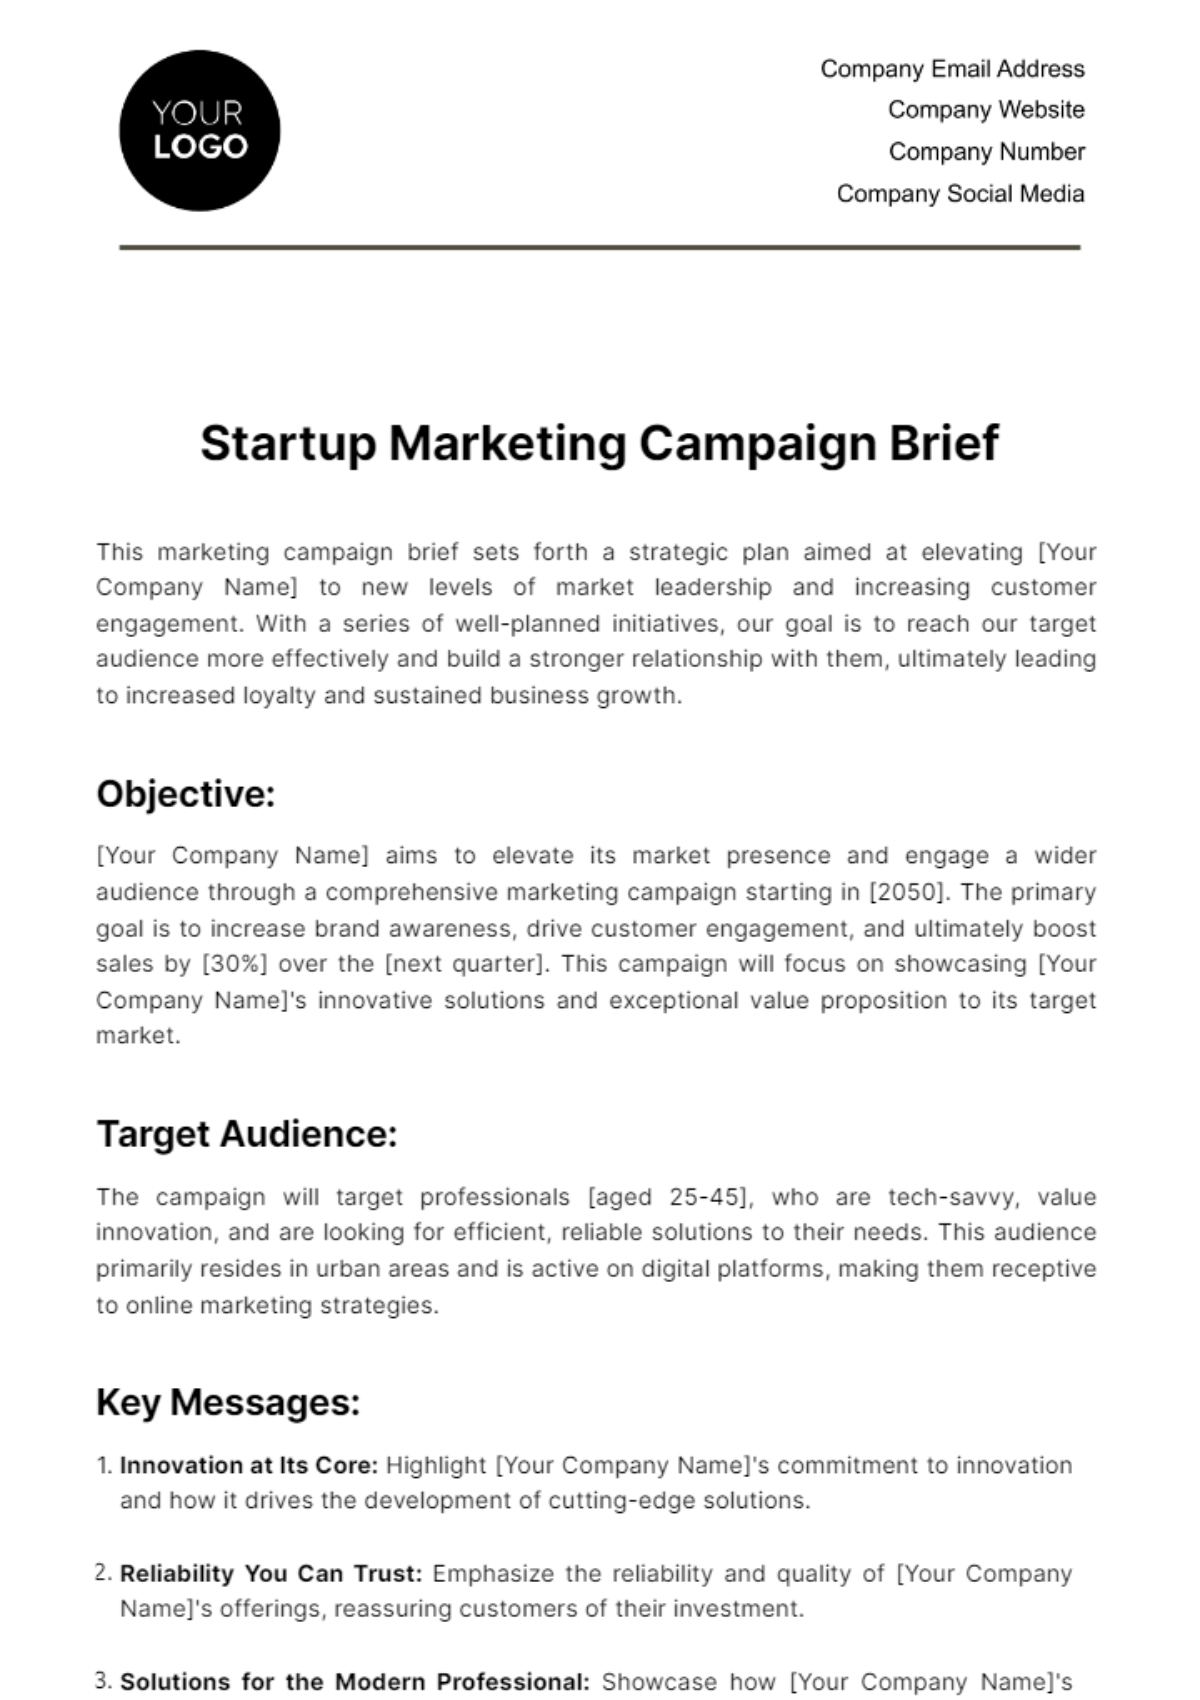 Startup Marketing Campaign Brief Template